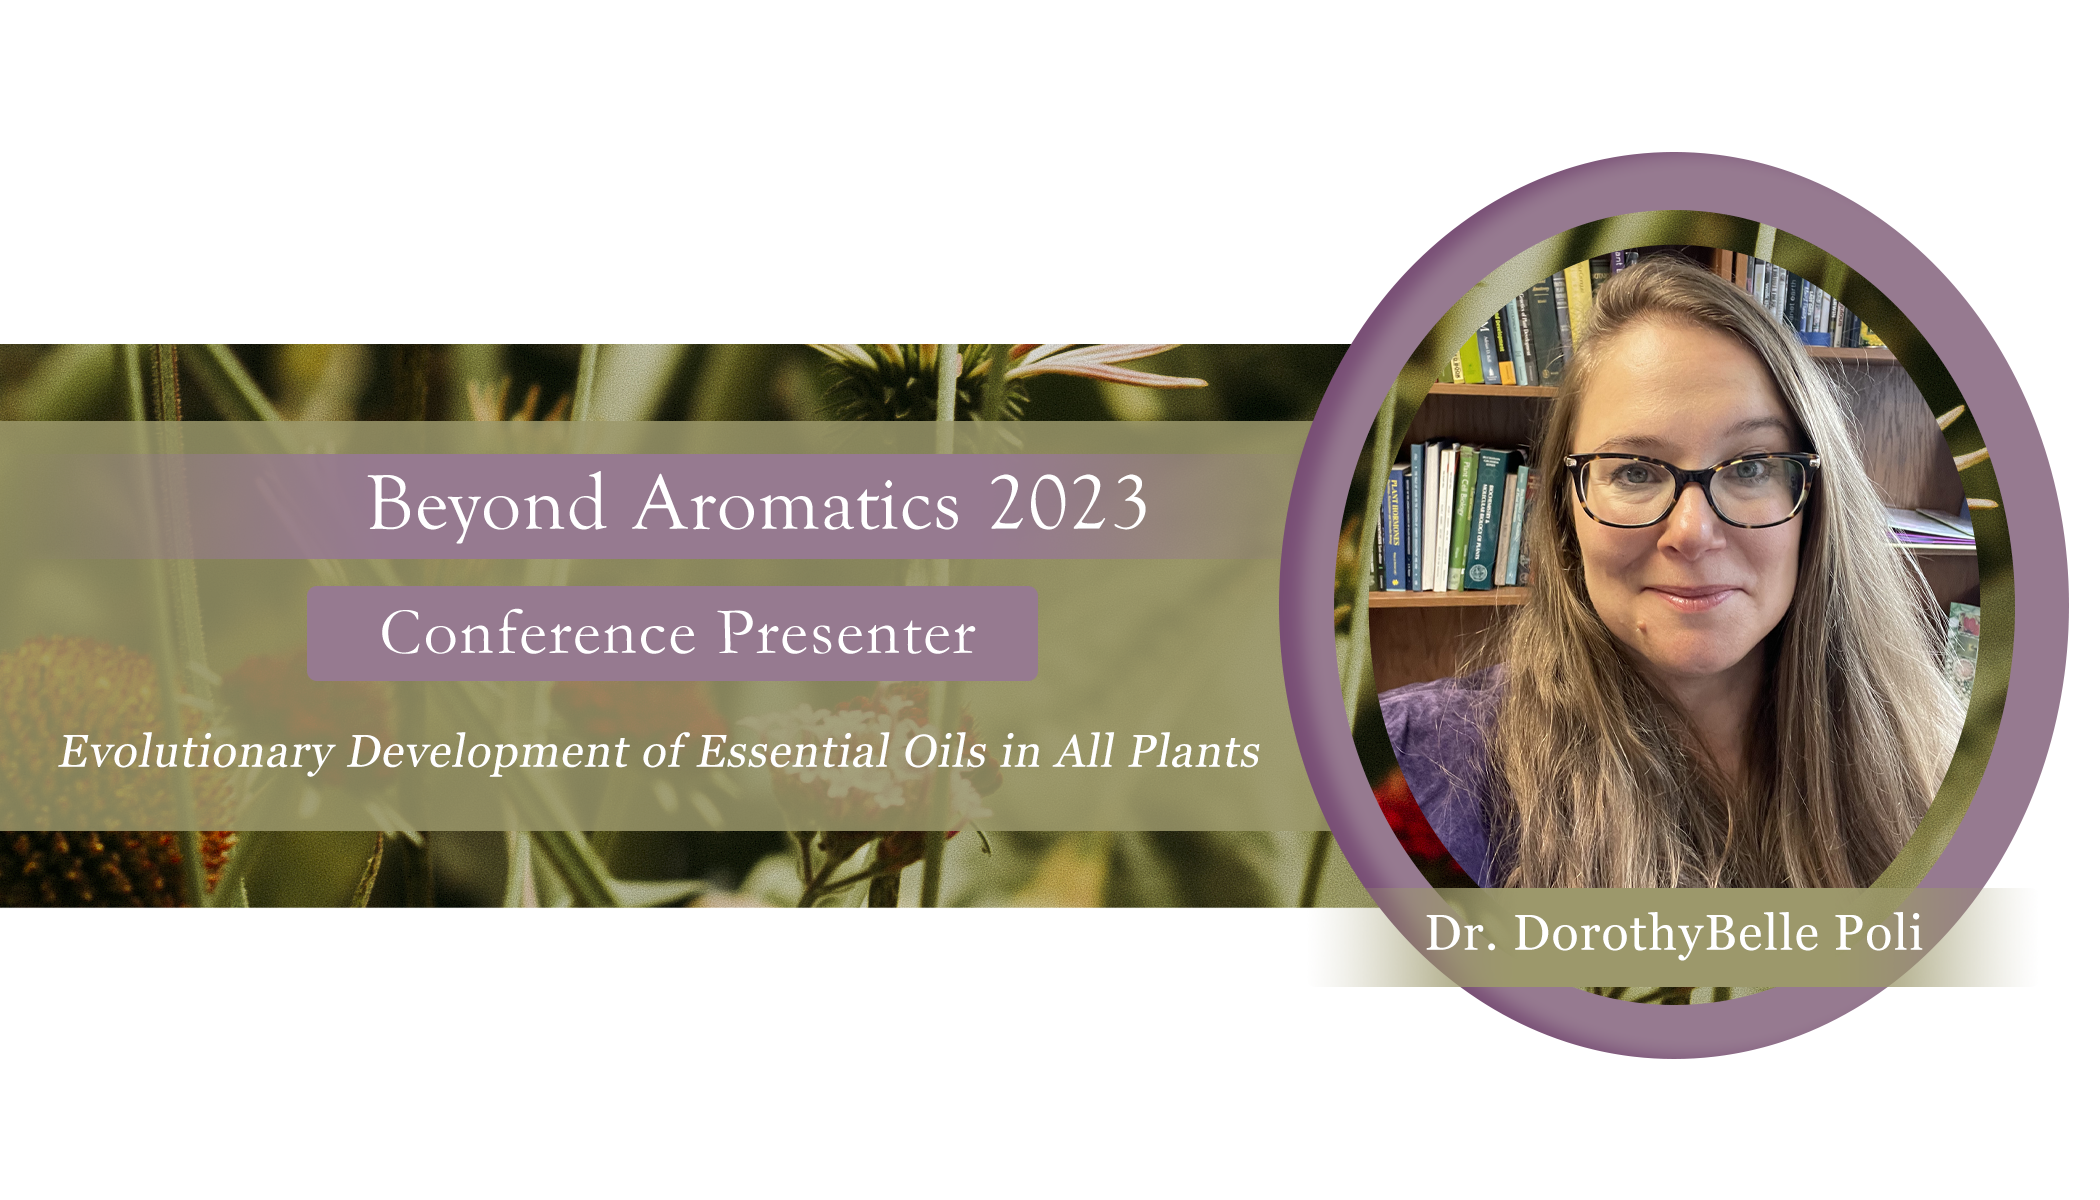 Evolutionary Development of Essential Oils in All Plants